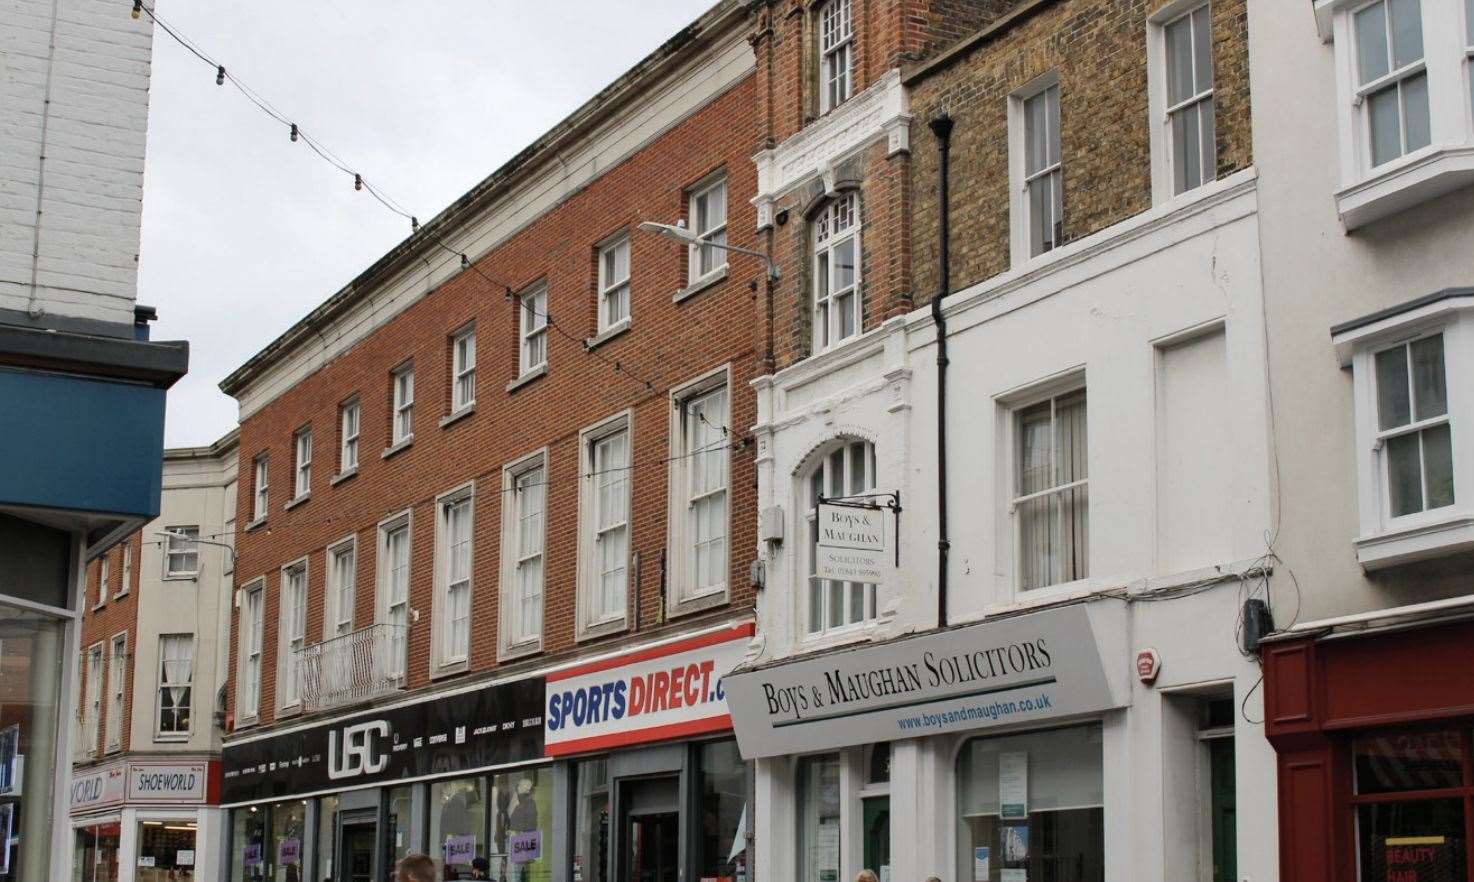 Sports Direct and USC stores will be redeveloped in Ramsgate town centre with 31 flats